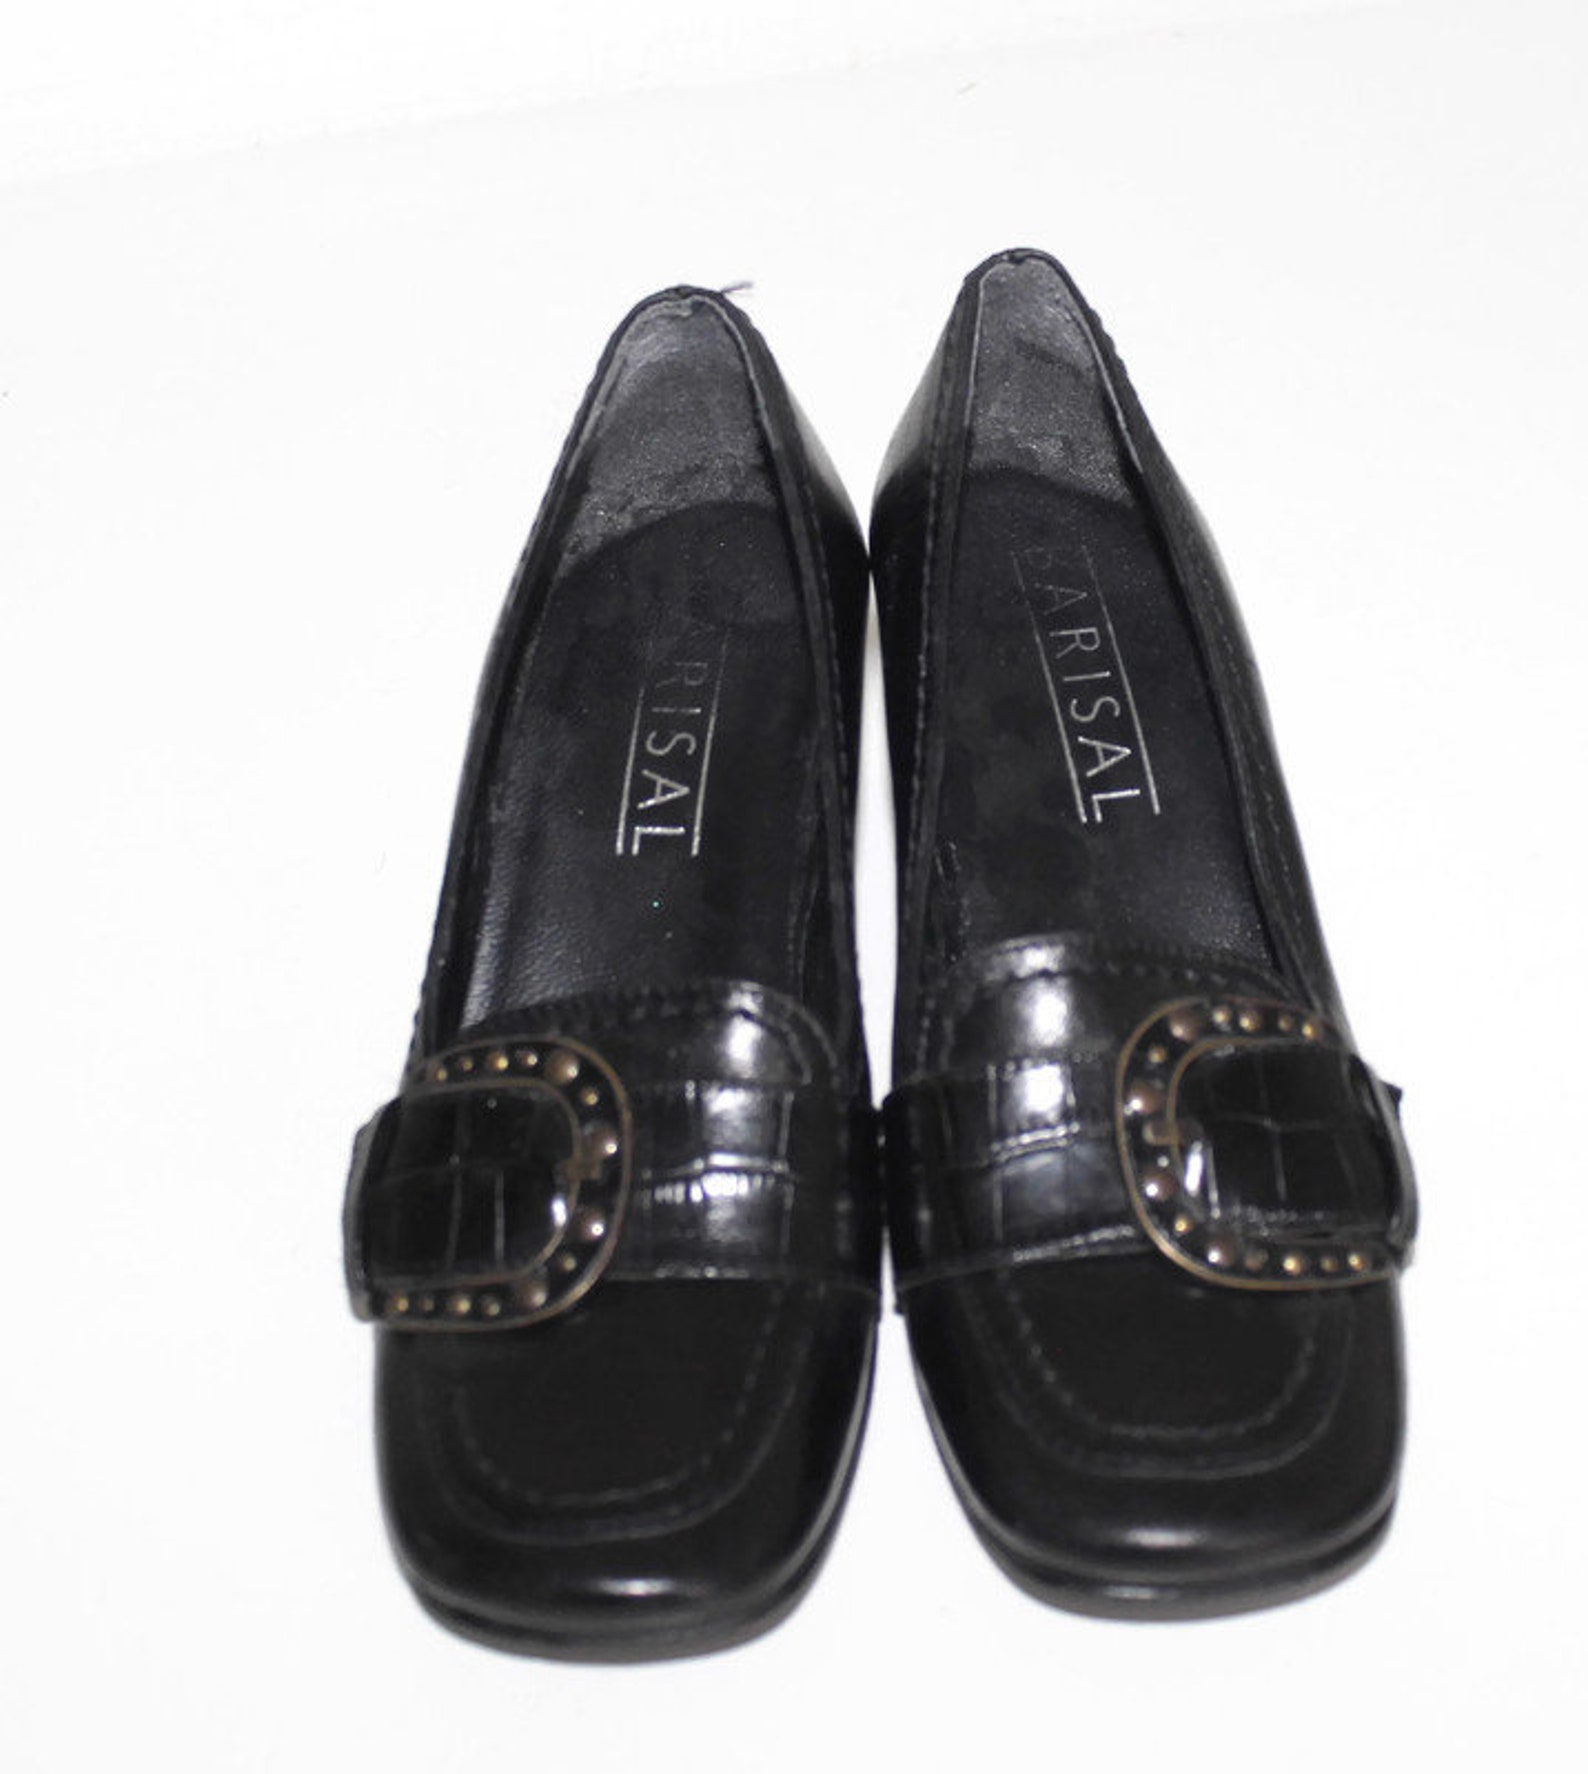 US 6 Grandma Loafers Black Leather Shoes 70s Heeled Stable - Etsy